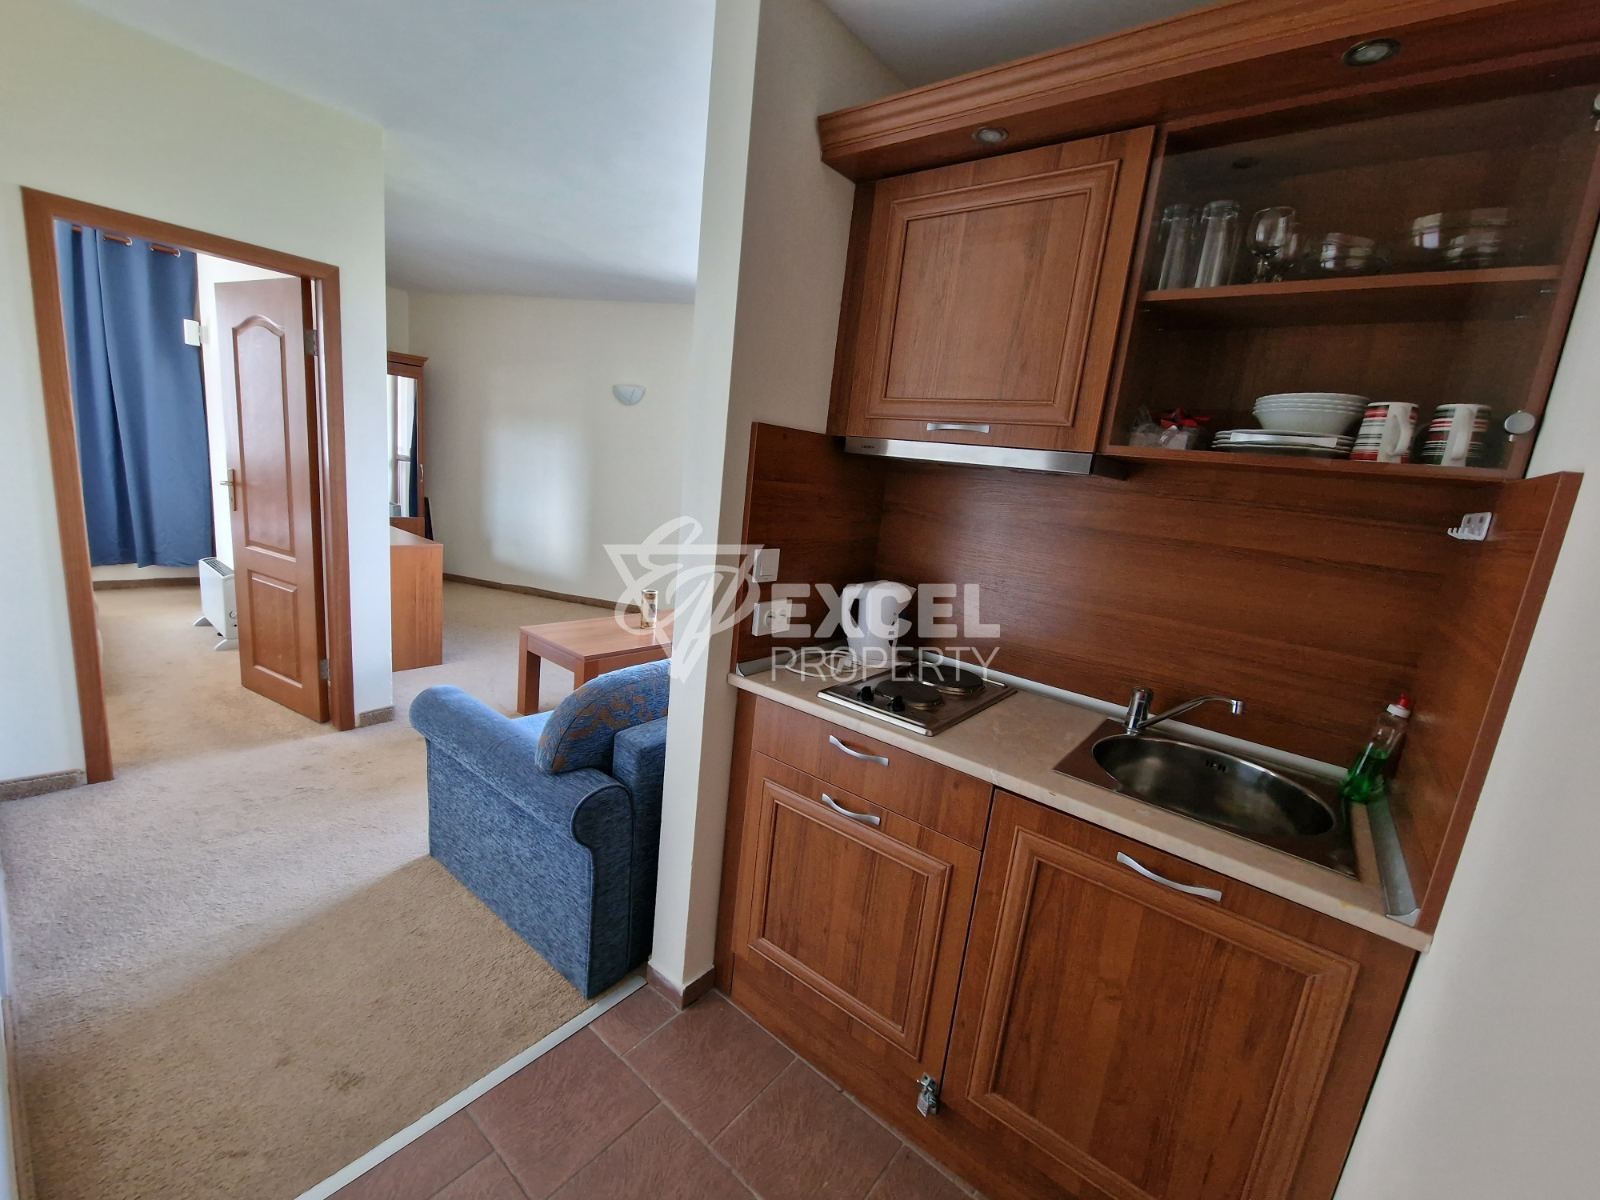 One-bedroom apartment for rent 50 meters from the Kempinski Hotel in Bansko